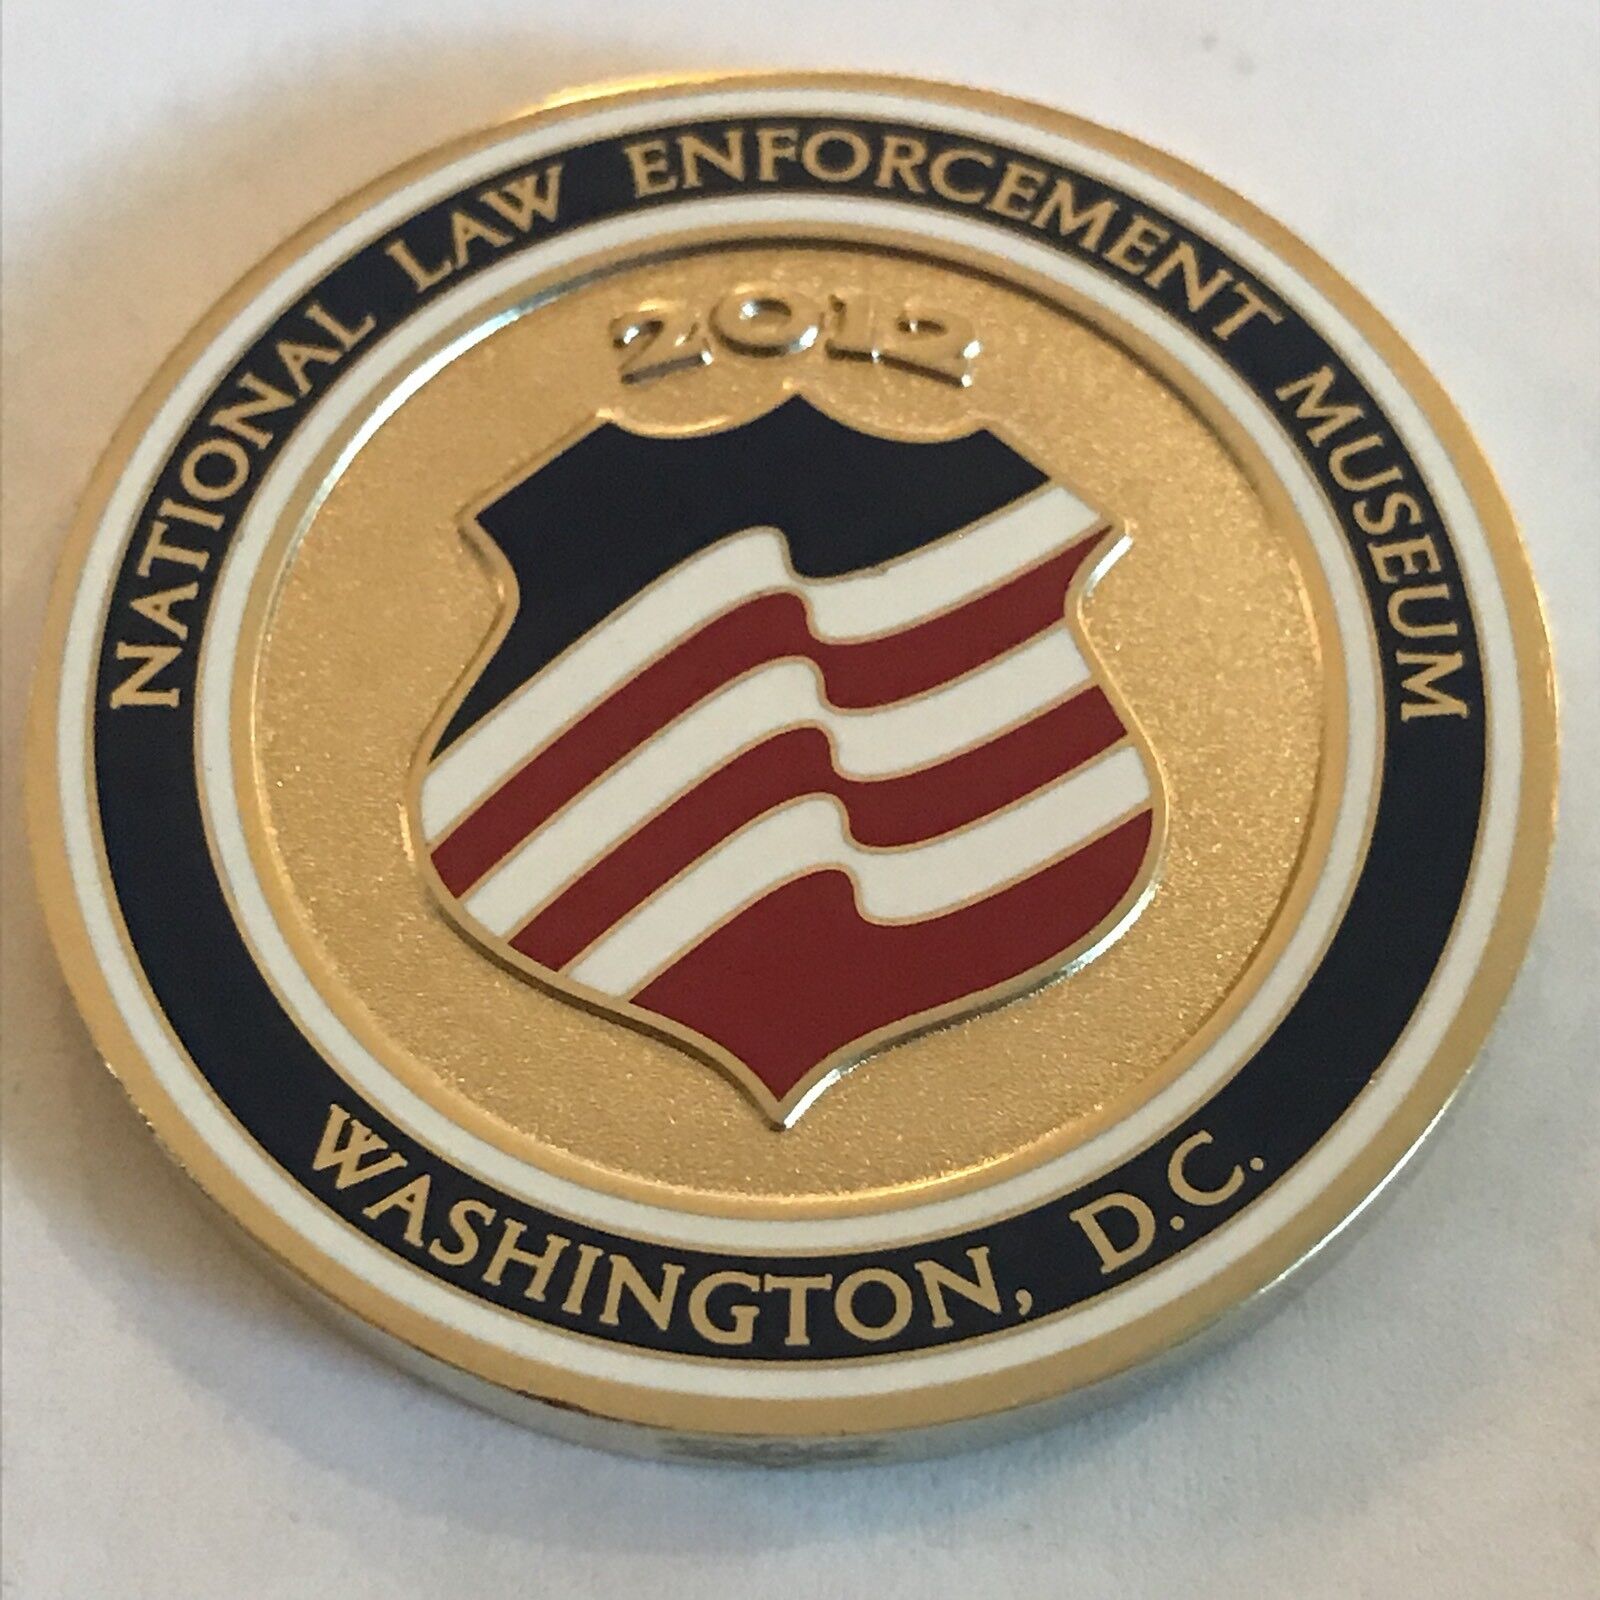 2012 National Law Enforcement Museum Police Challenge Coin